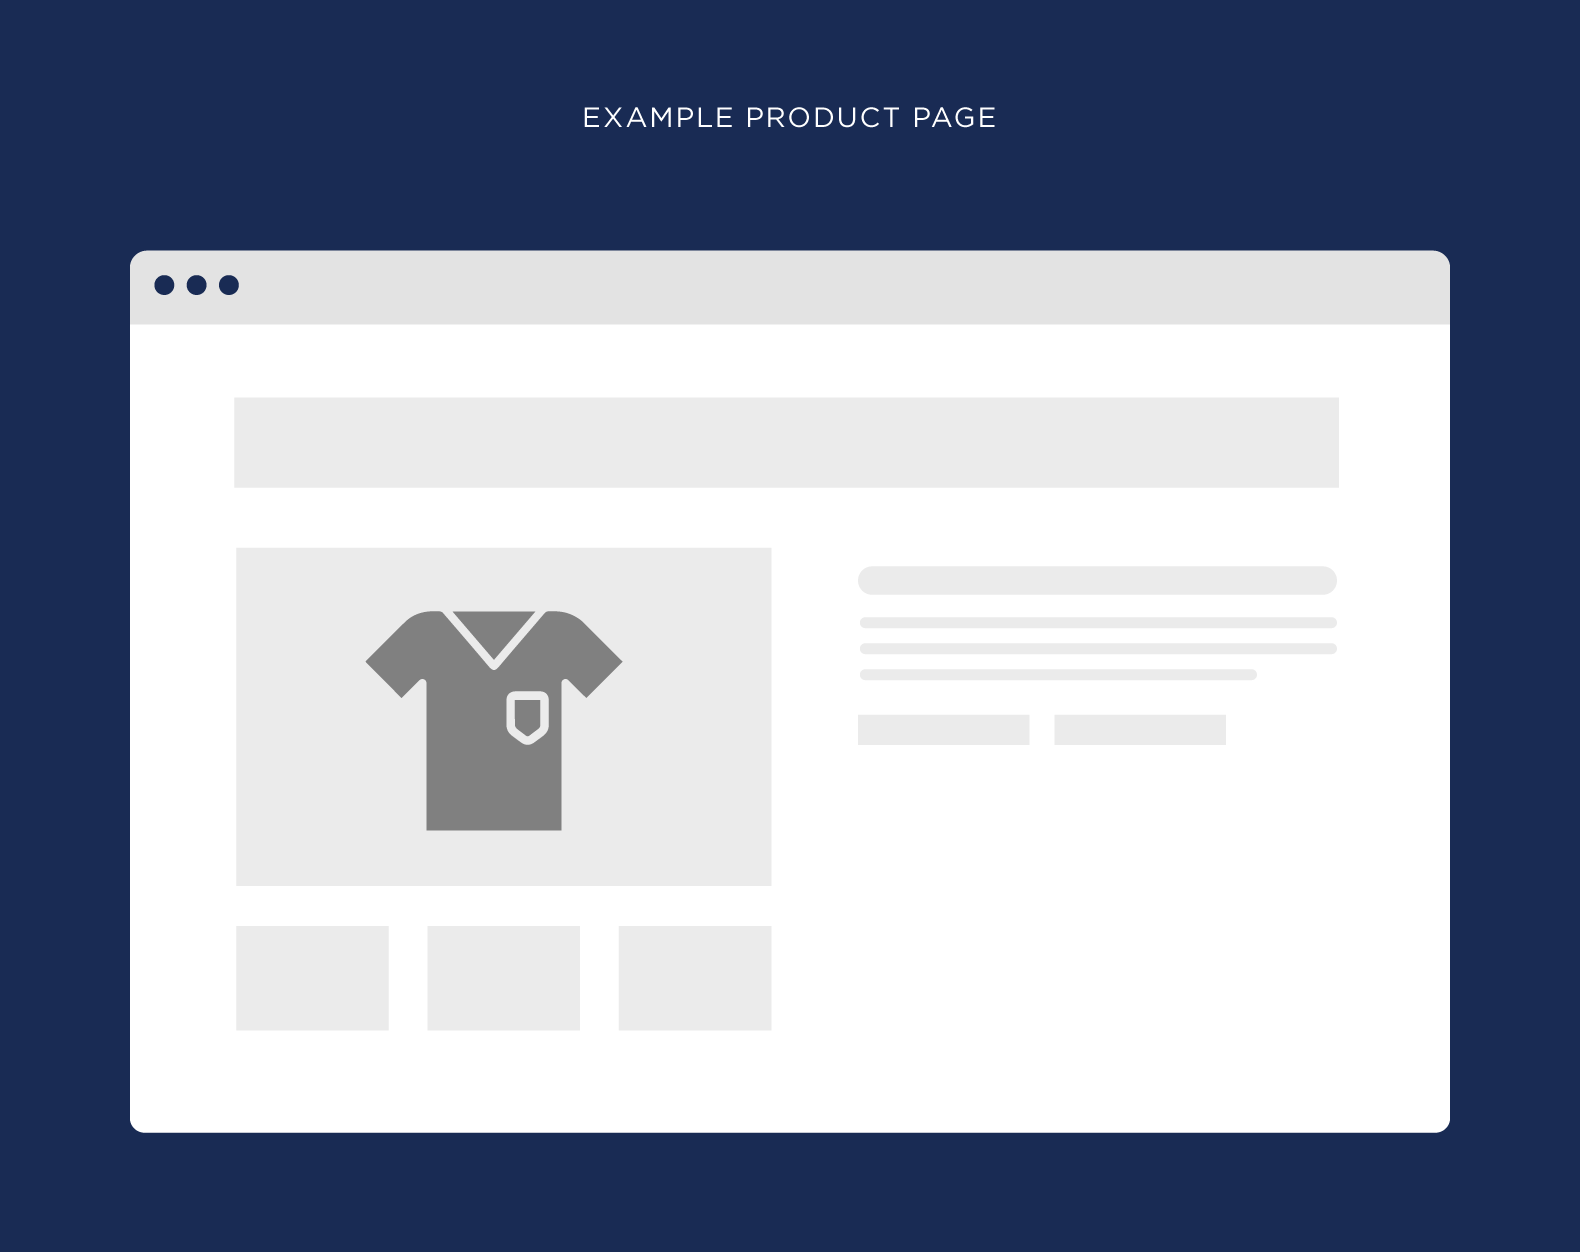 Example product page